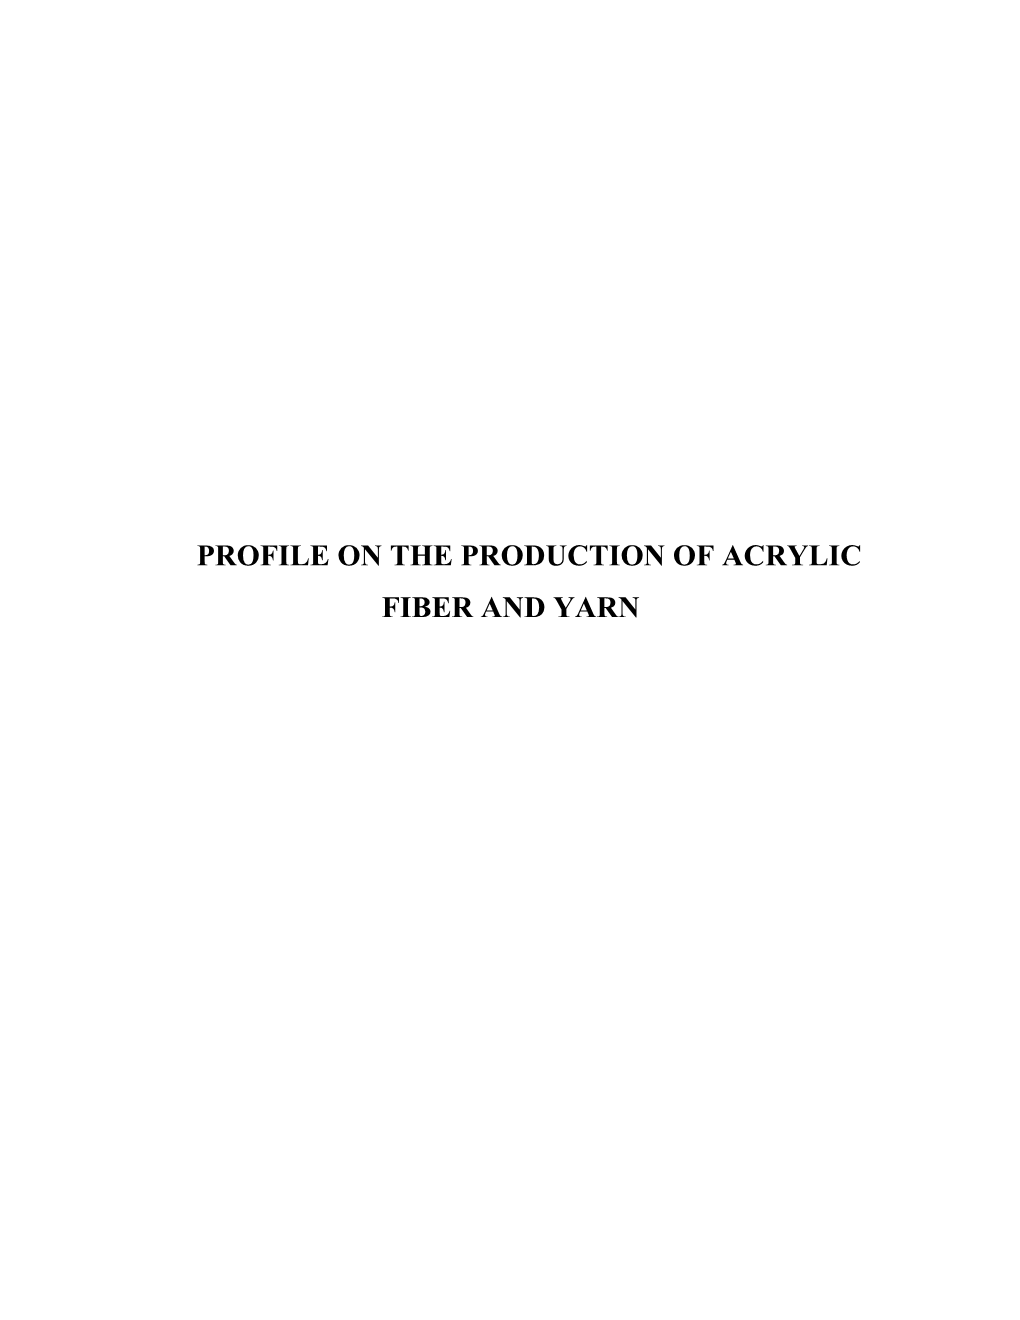 Profile on the Production of Acrylic Fiber and Yarn